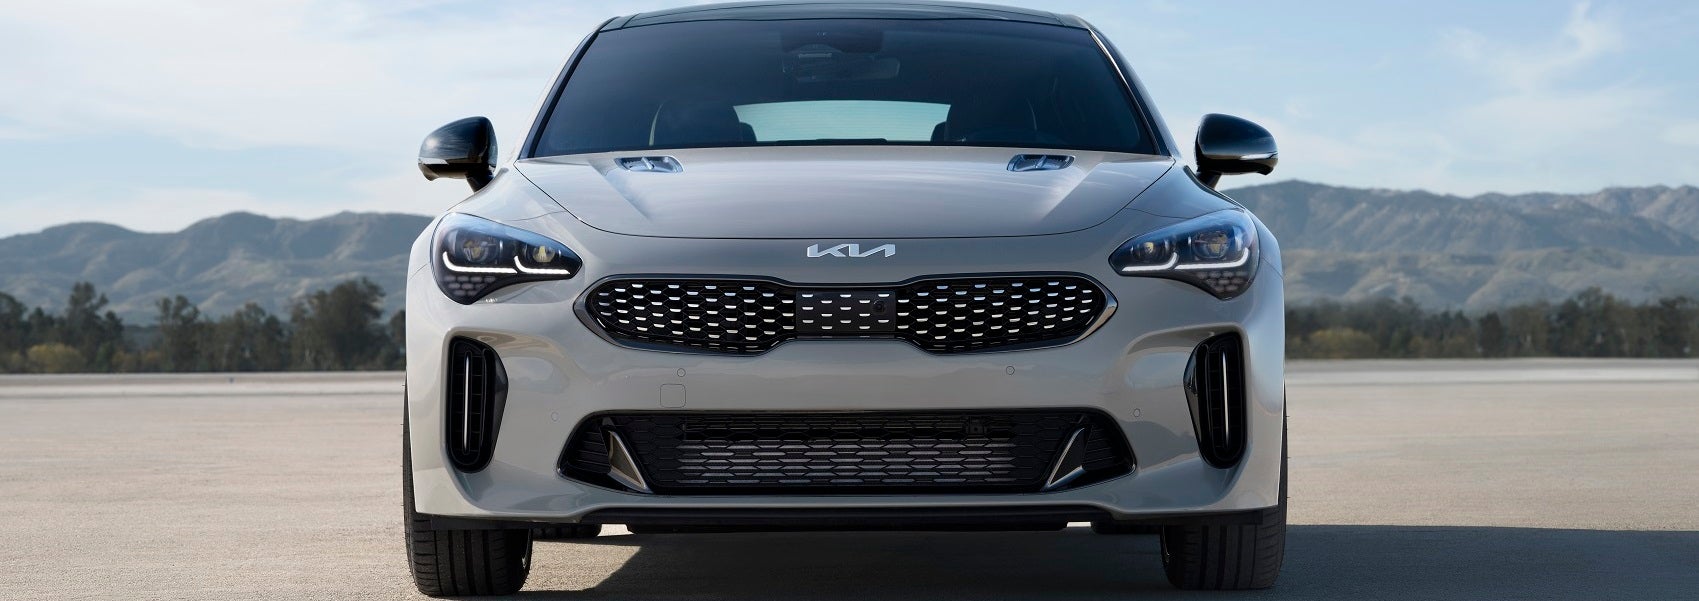 Certified Pre-Owned Kia Stinger for Sale